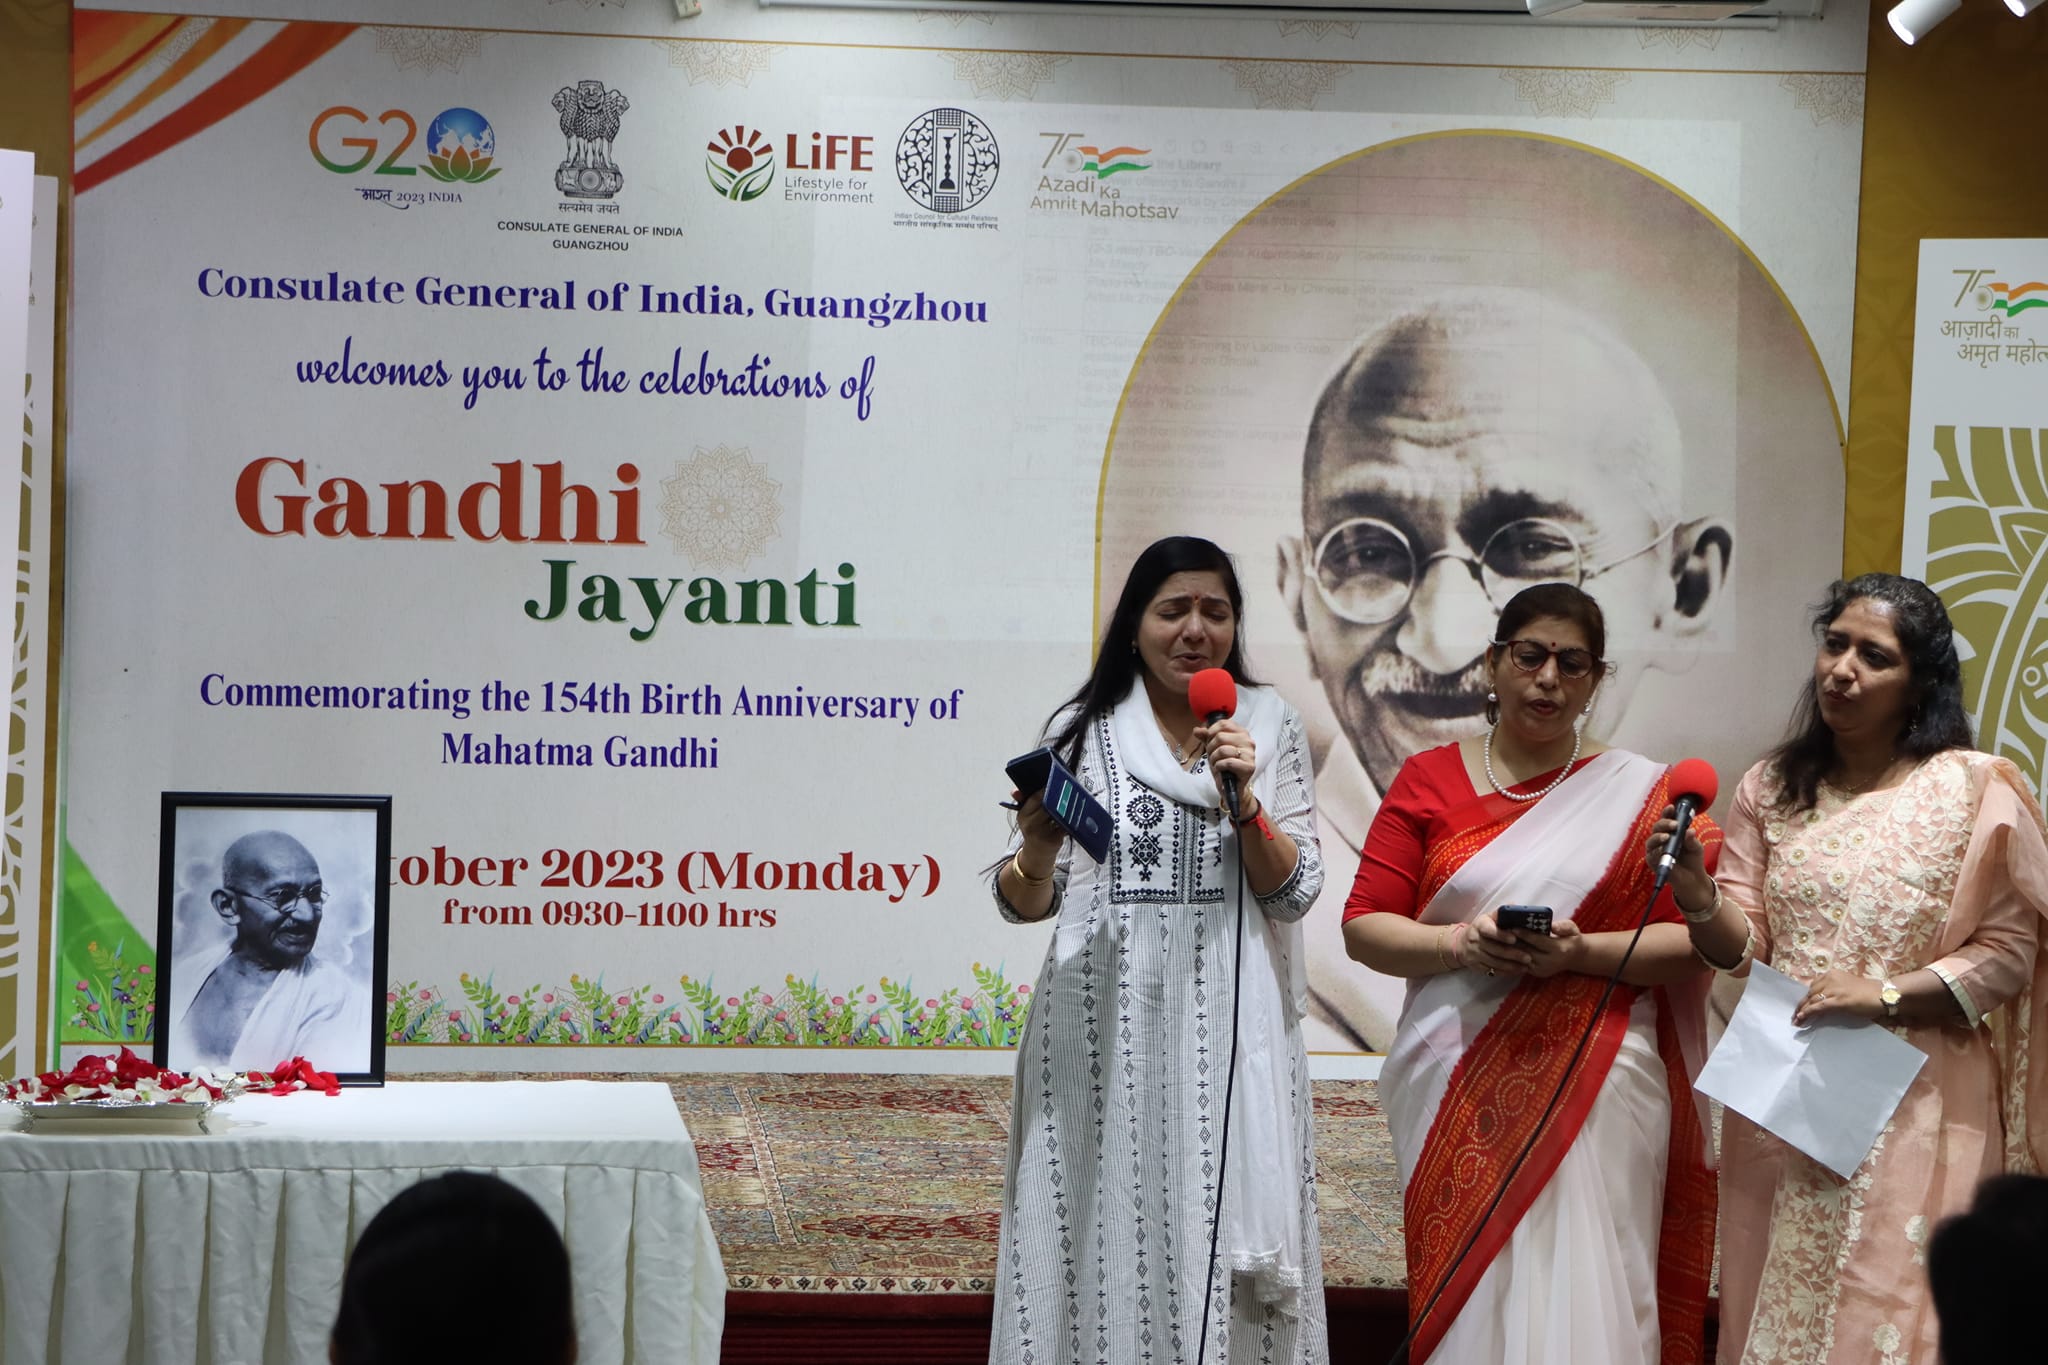 Consulate General of India, Guangzhou celebrated Gandhi Jayanti to commemorate the 154th Birth Anniversary of Mahatma Gandhi on 2 October 2023. The event saw an enthusiastic participation from Indian Diaspora and Friends of India. 